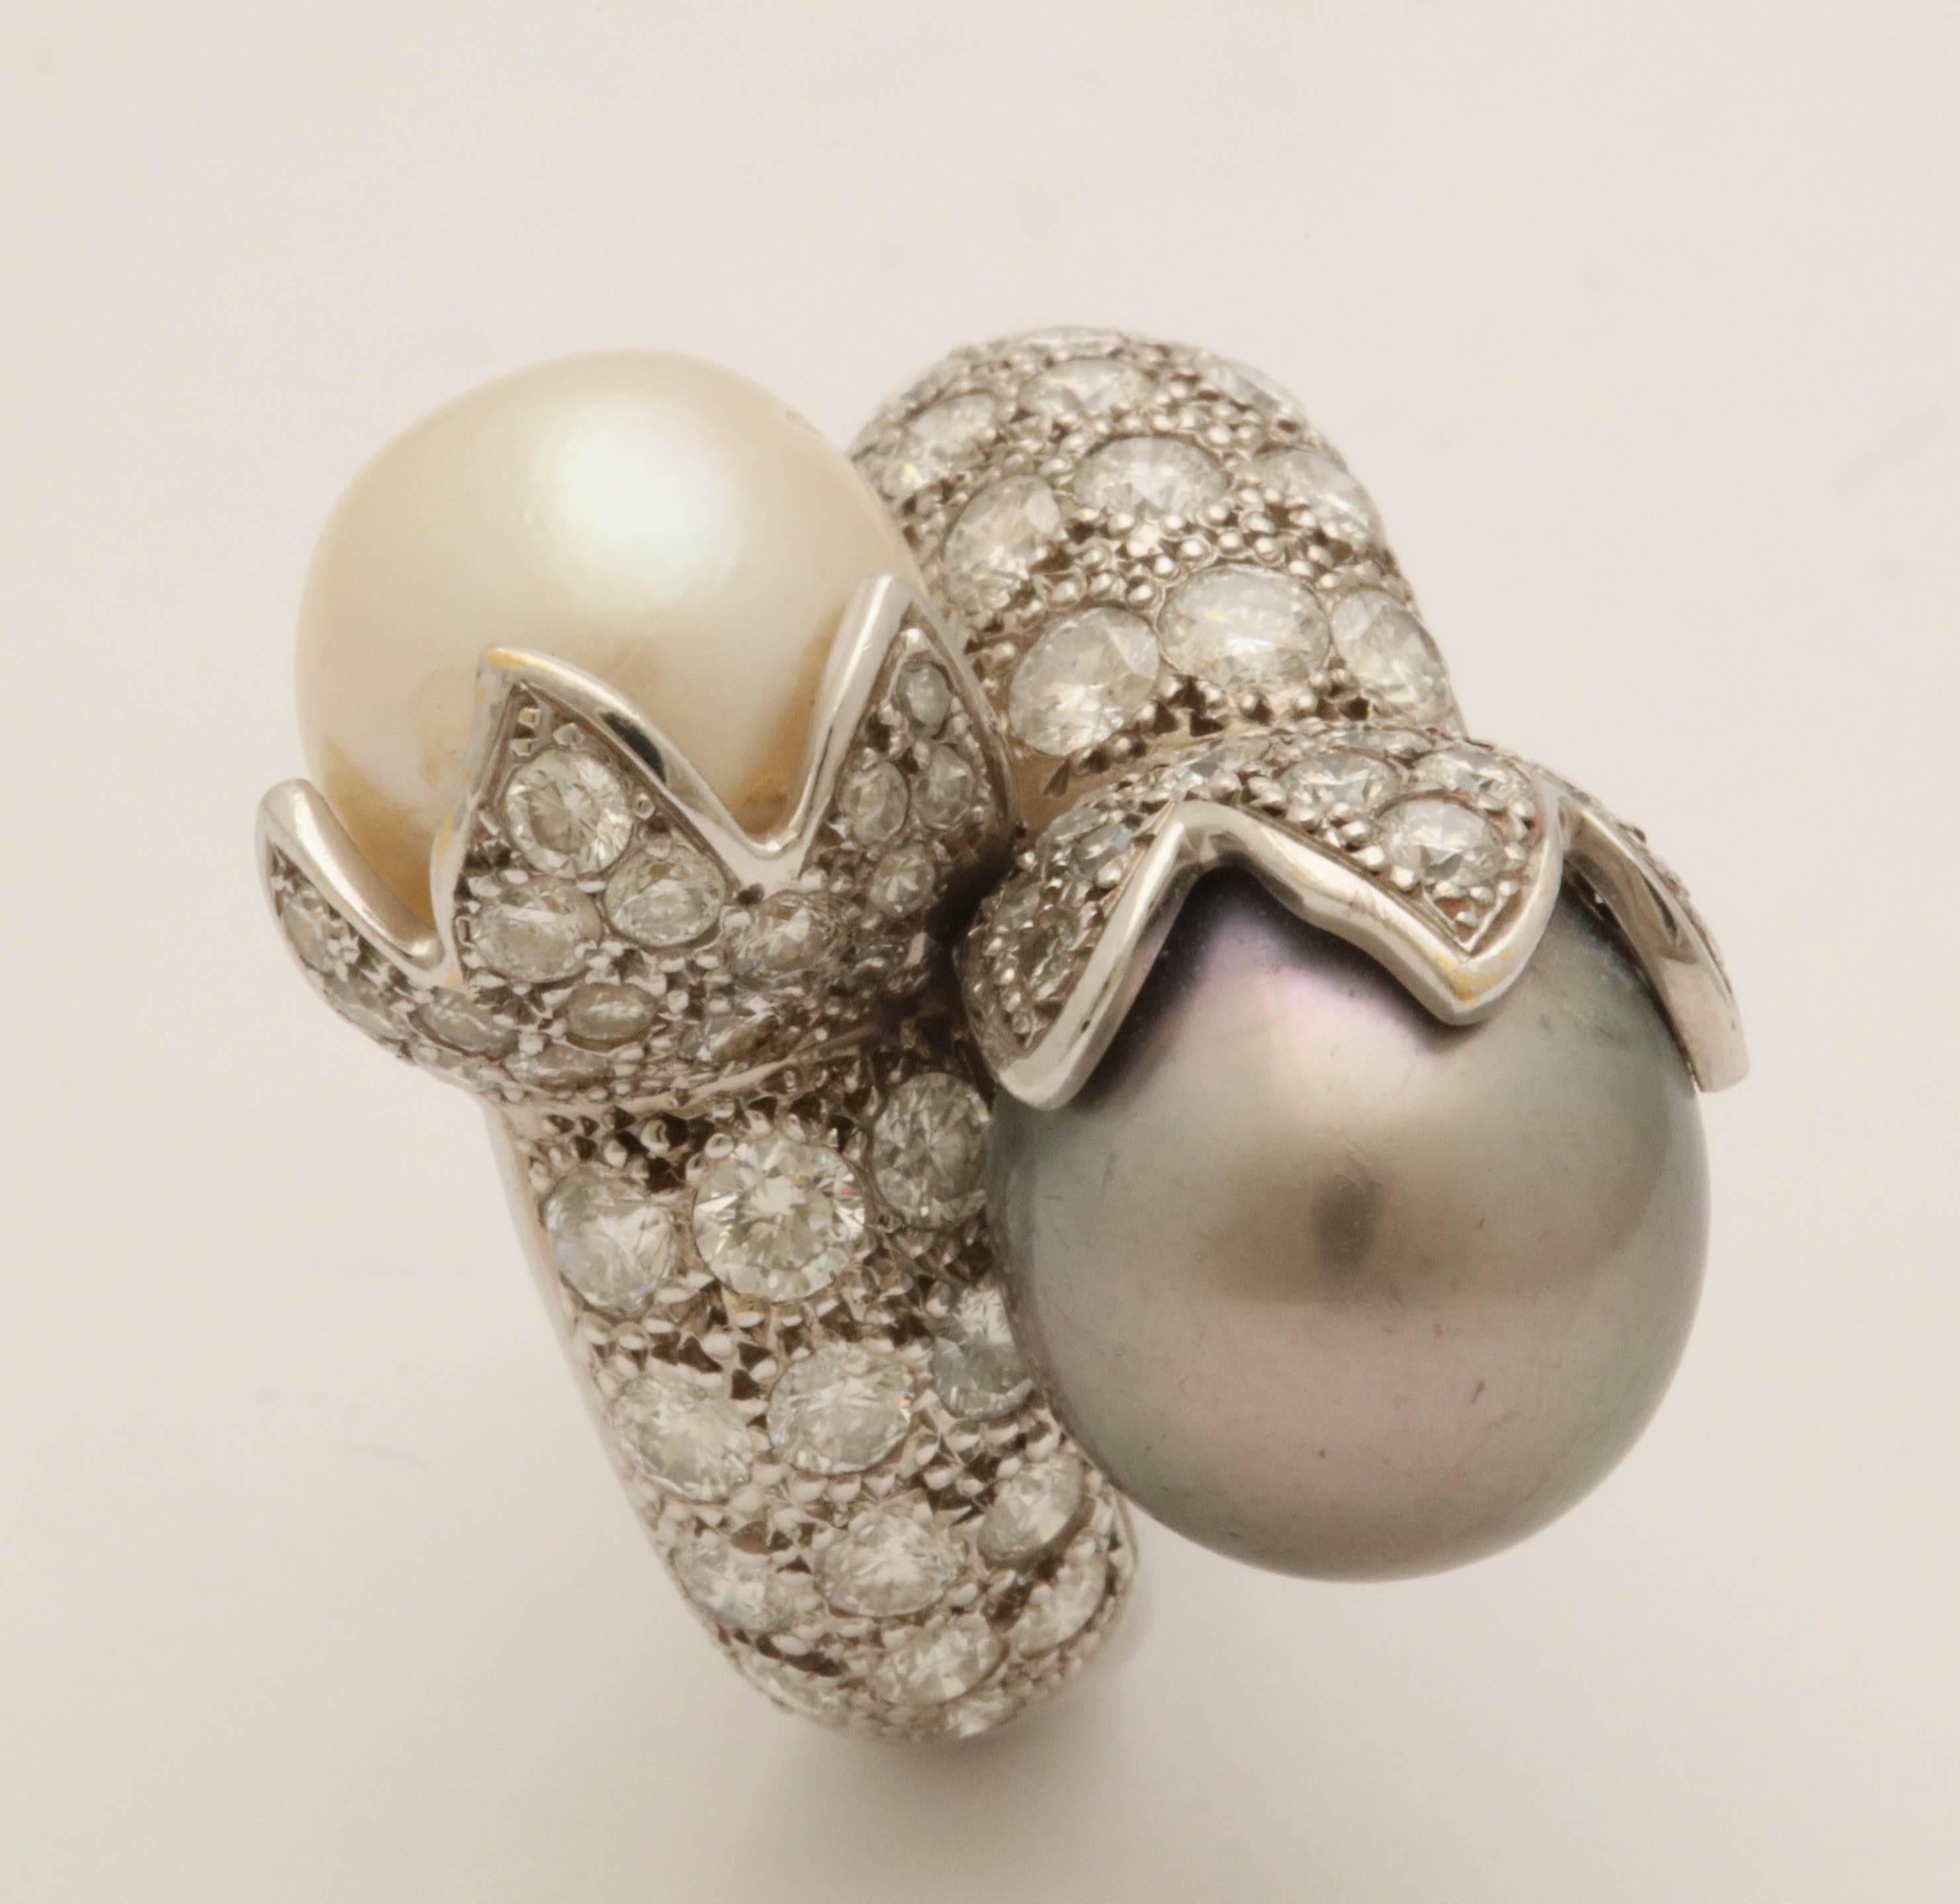 One Ladies White Gold Double Crossover Bypass Cocktail Ring Embellished With One Cultured Pearl Measuring Approximately 11Mm And One Grey Silver Tahitian Pearl Measuring approximately 12Mm . Bypass Cocktail Ring Is Further embellished With Numerous